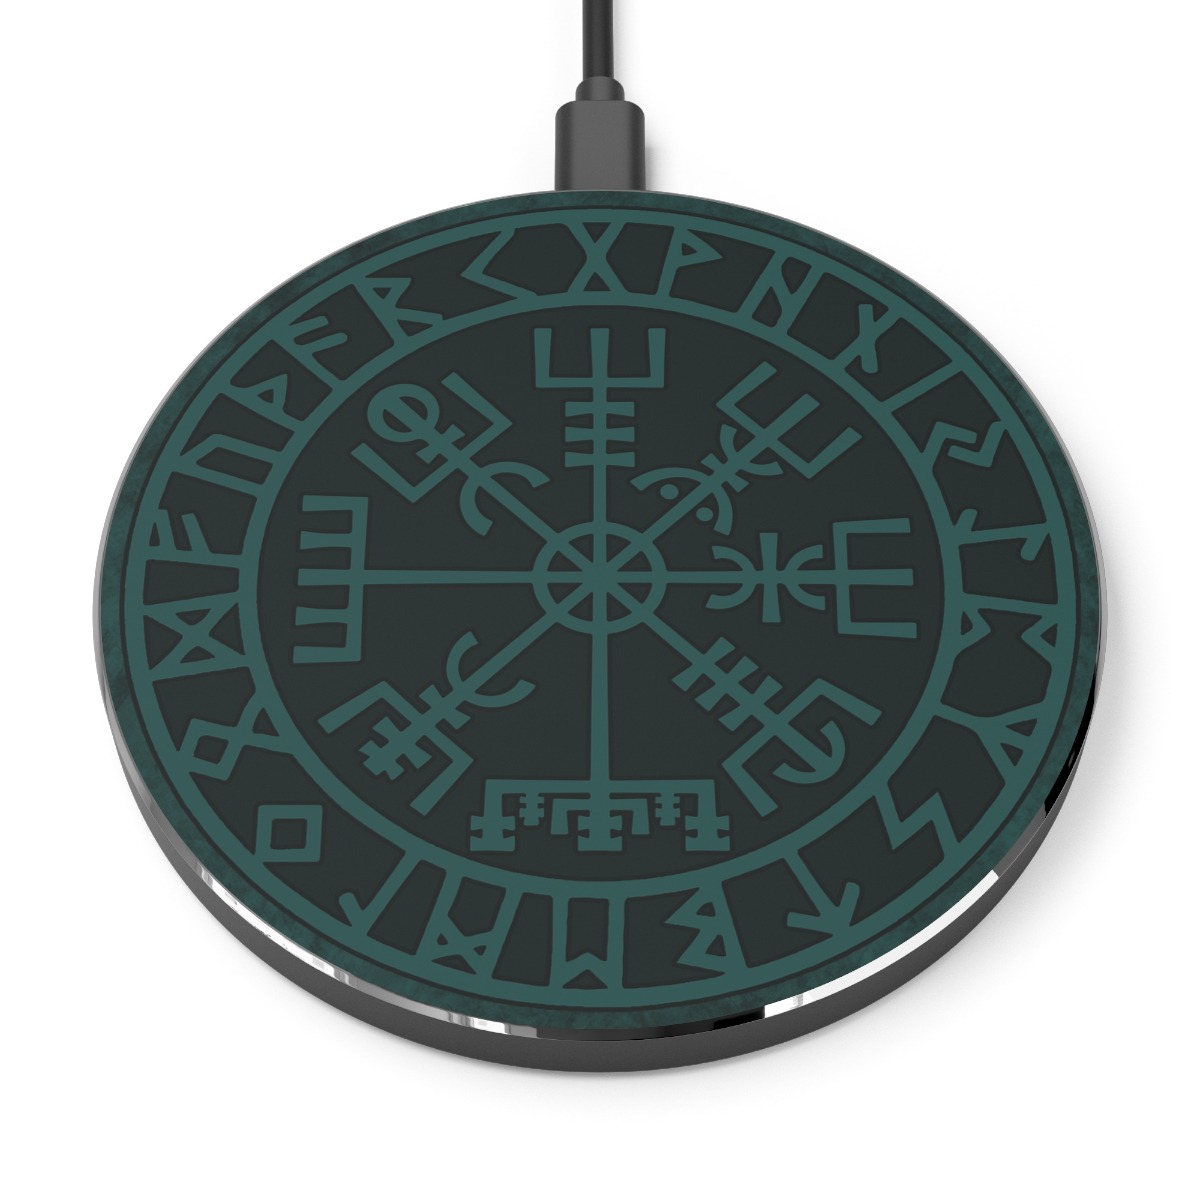 Teal Runic Vegvisir Wireless Charger